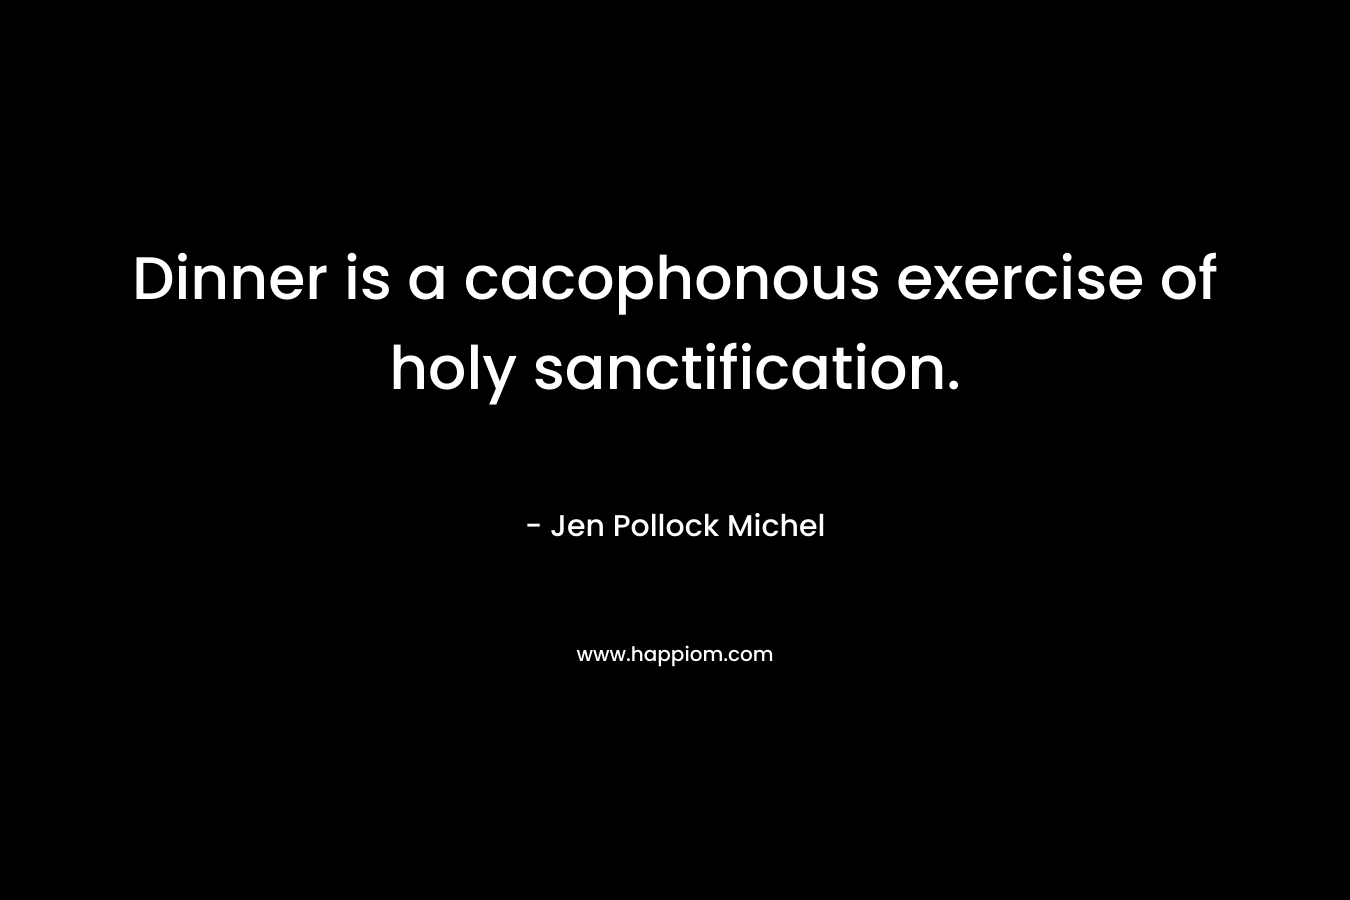 Dinner is a cacophonous exercise of holy sanctification. – Jen Pollock Michel